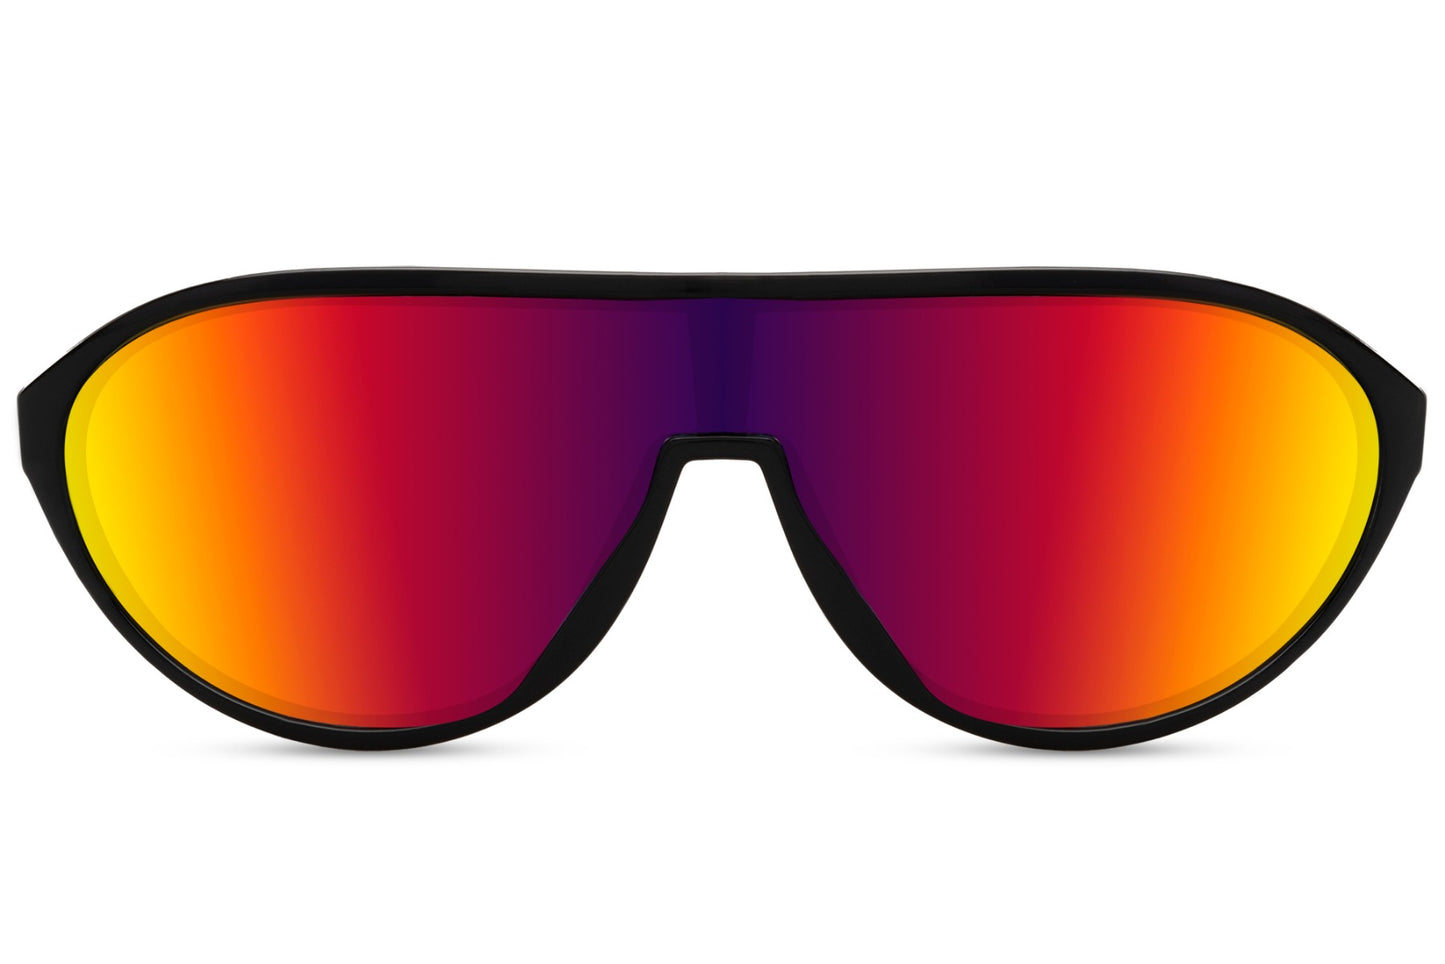 Mirrored Visor Style Party Sunglasses